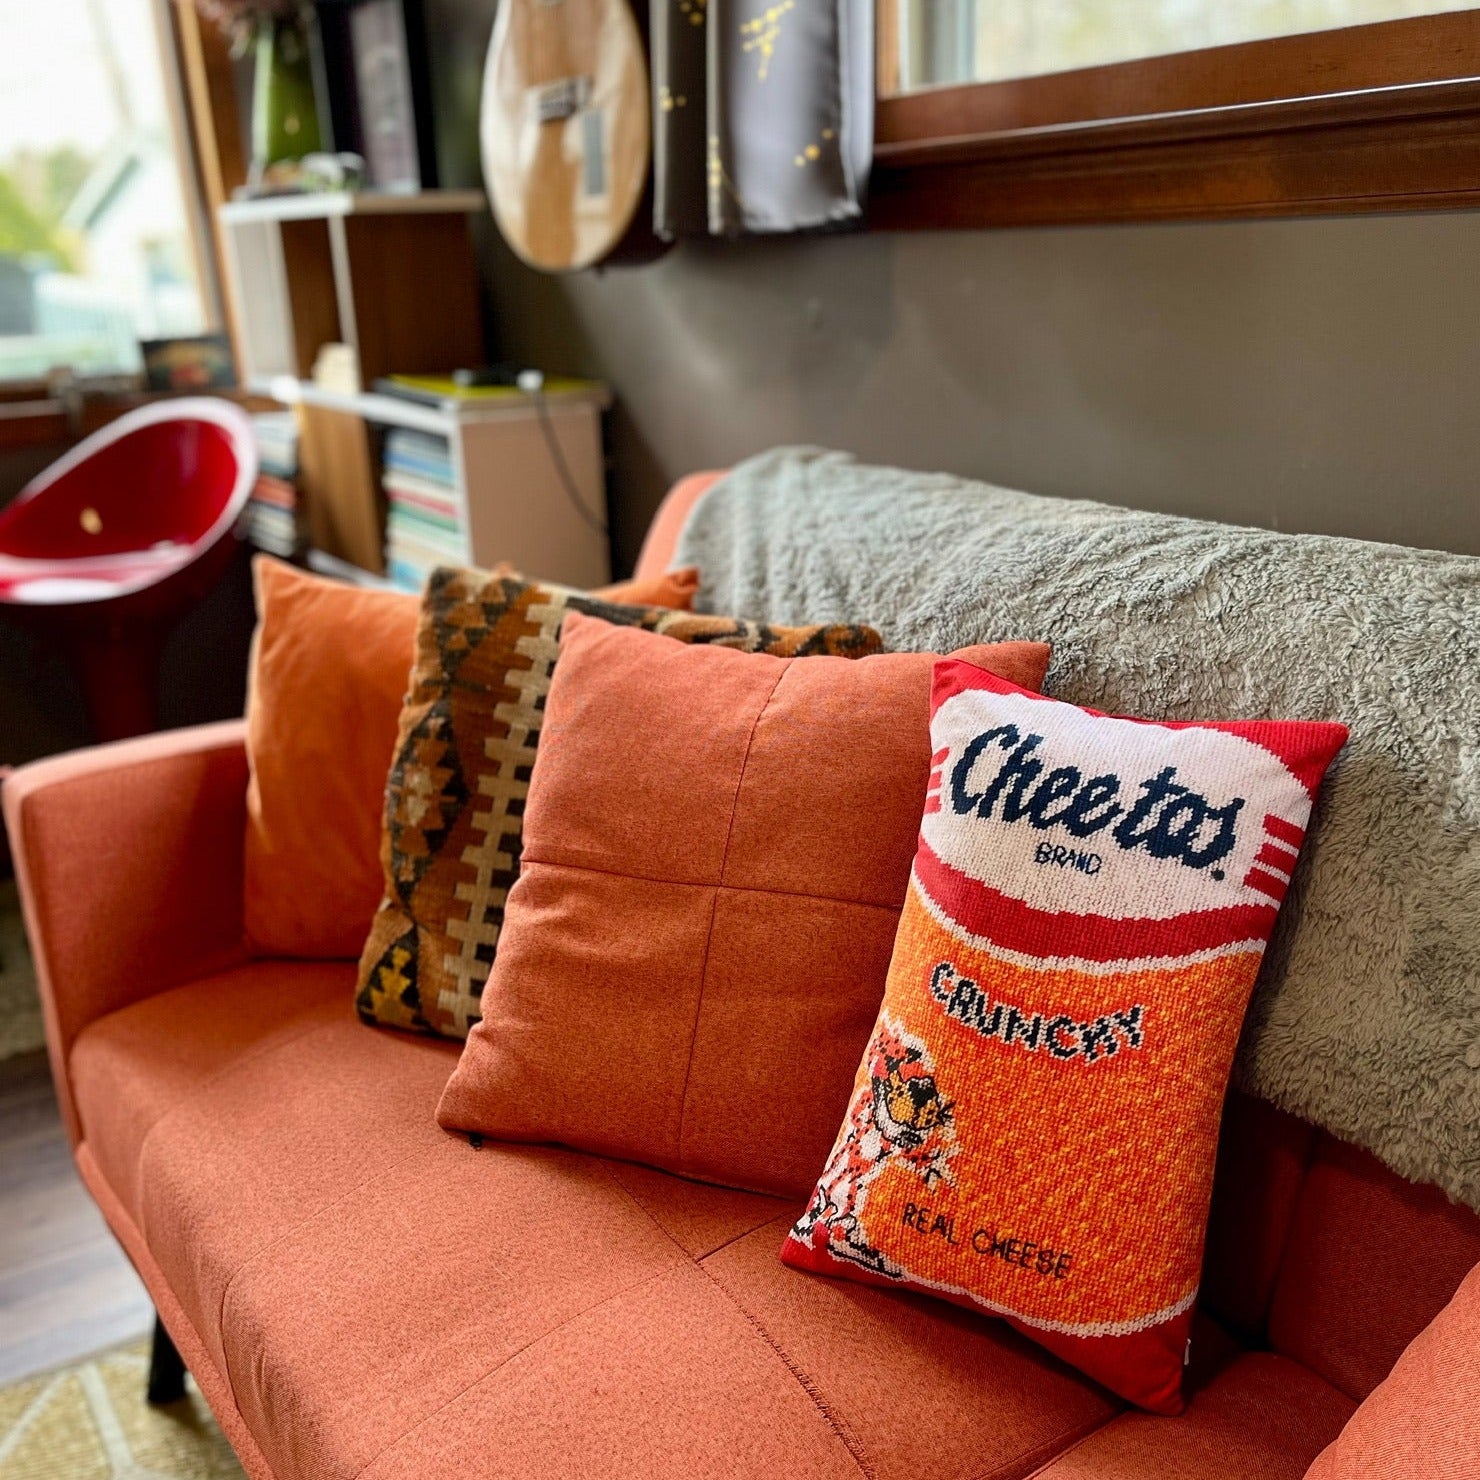 Cheetos pillow with crunchy logo & Chester on modern couch